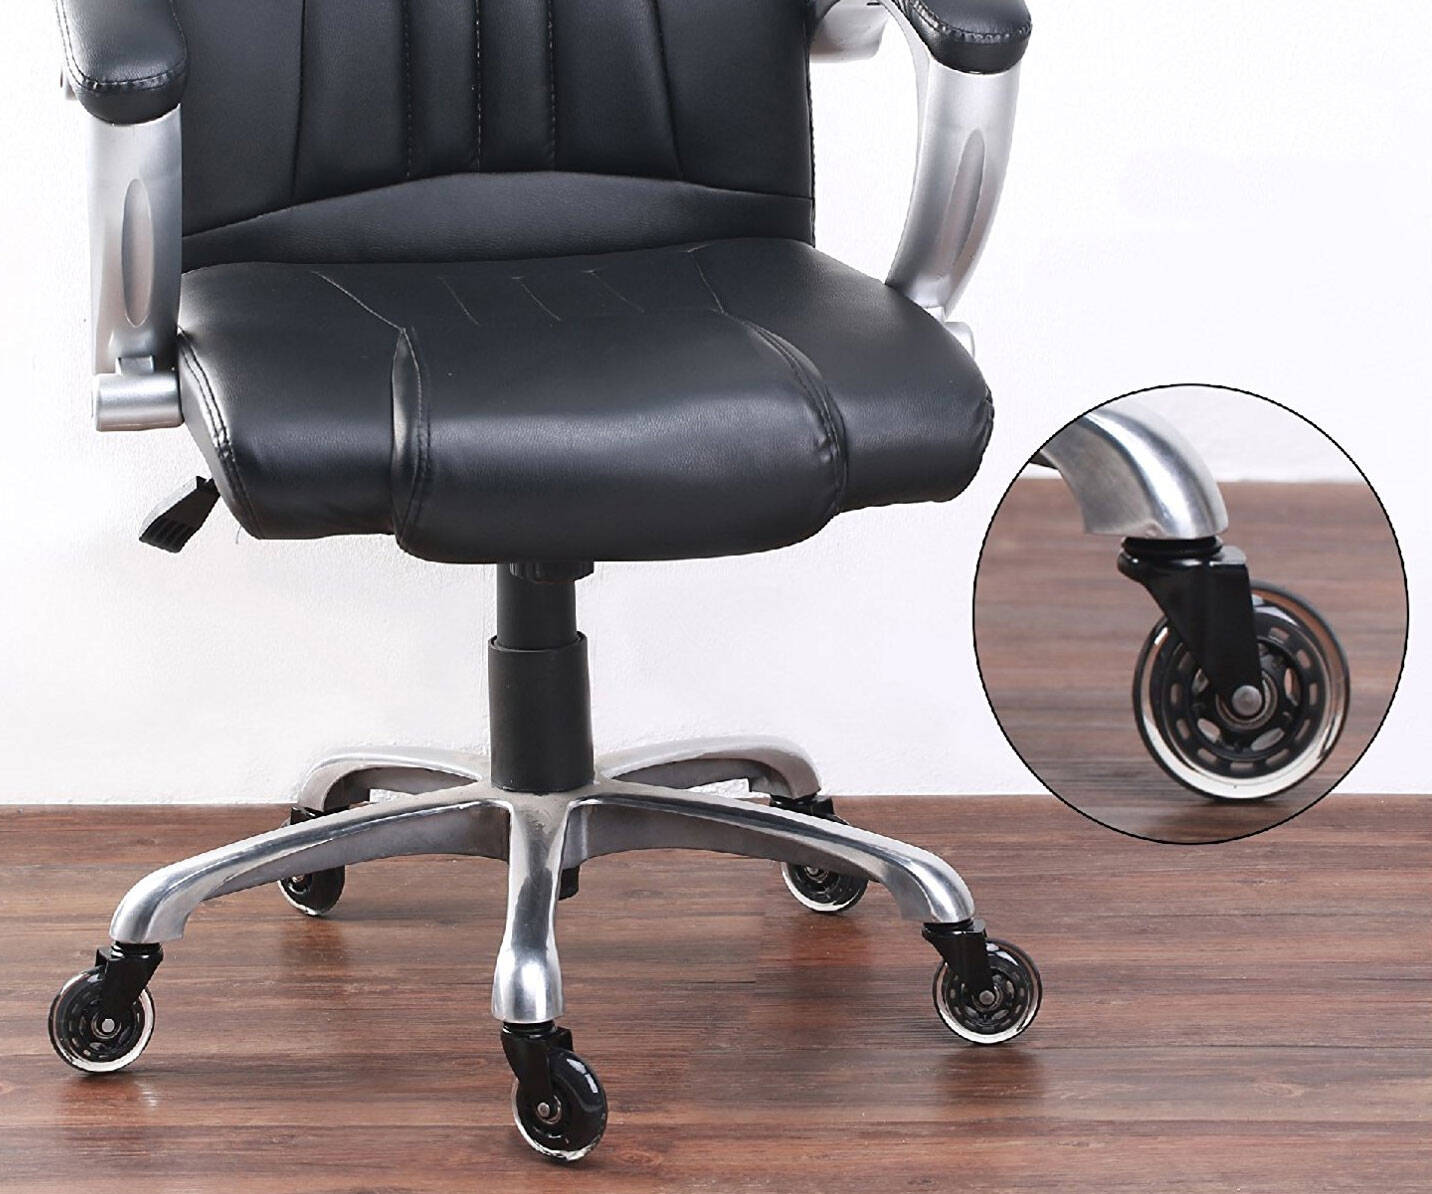 Rollerblade Wheels For Office Chairs - //coolthings.us